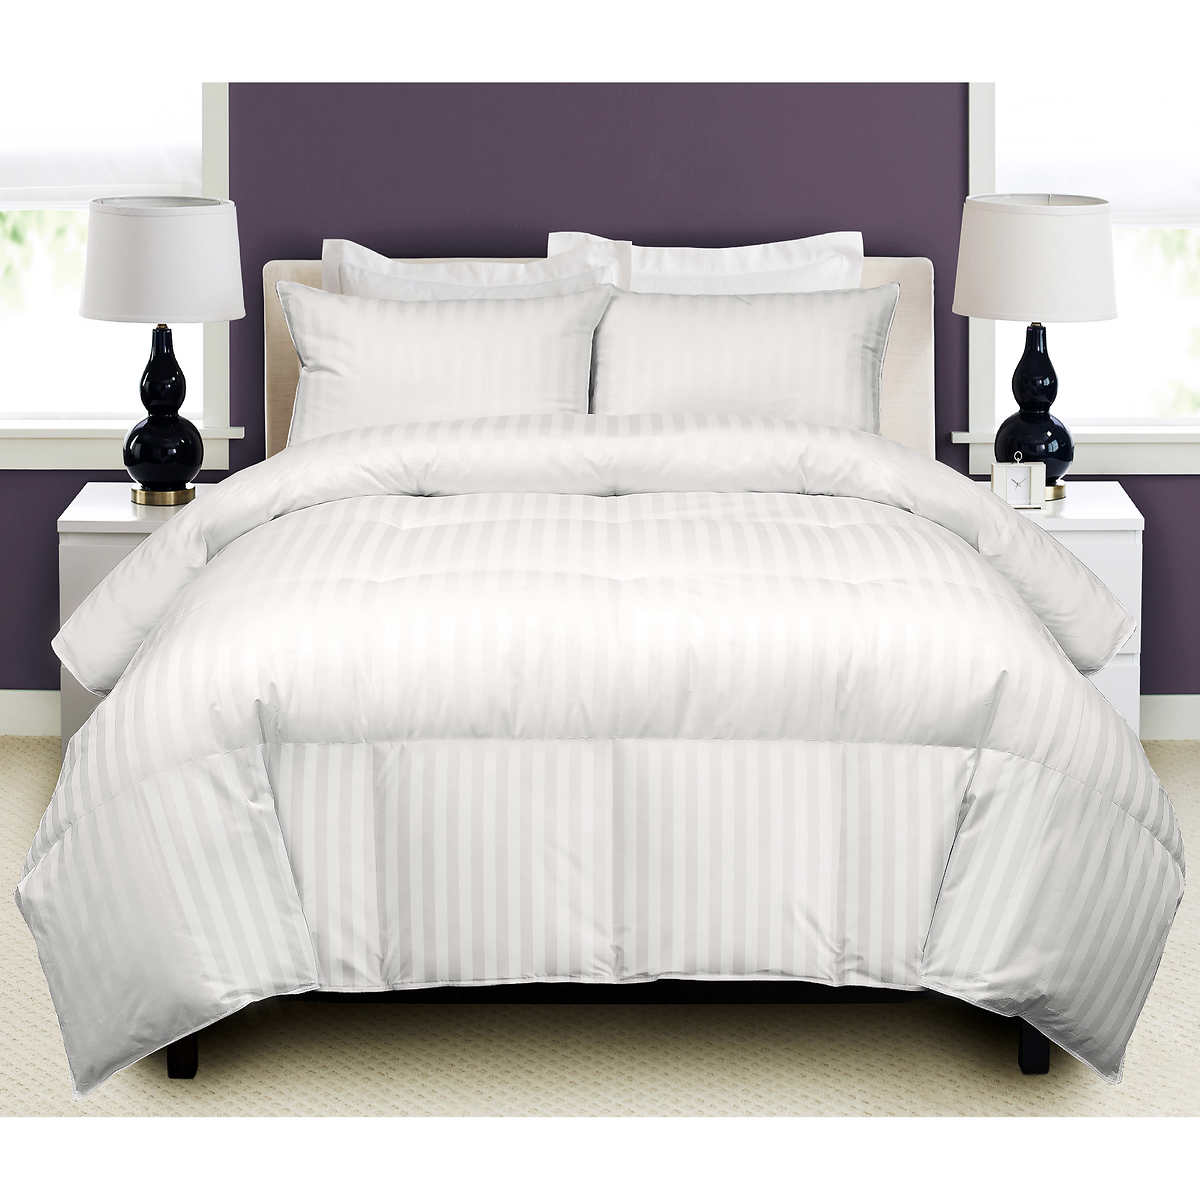 Hotel Grand White Goose Down Comforter, How To Fill A King Size Duvet Cover